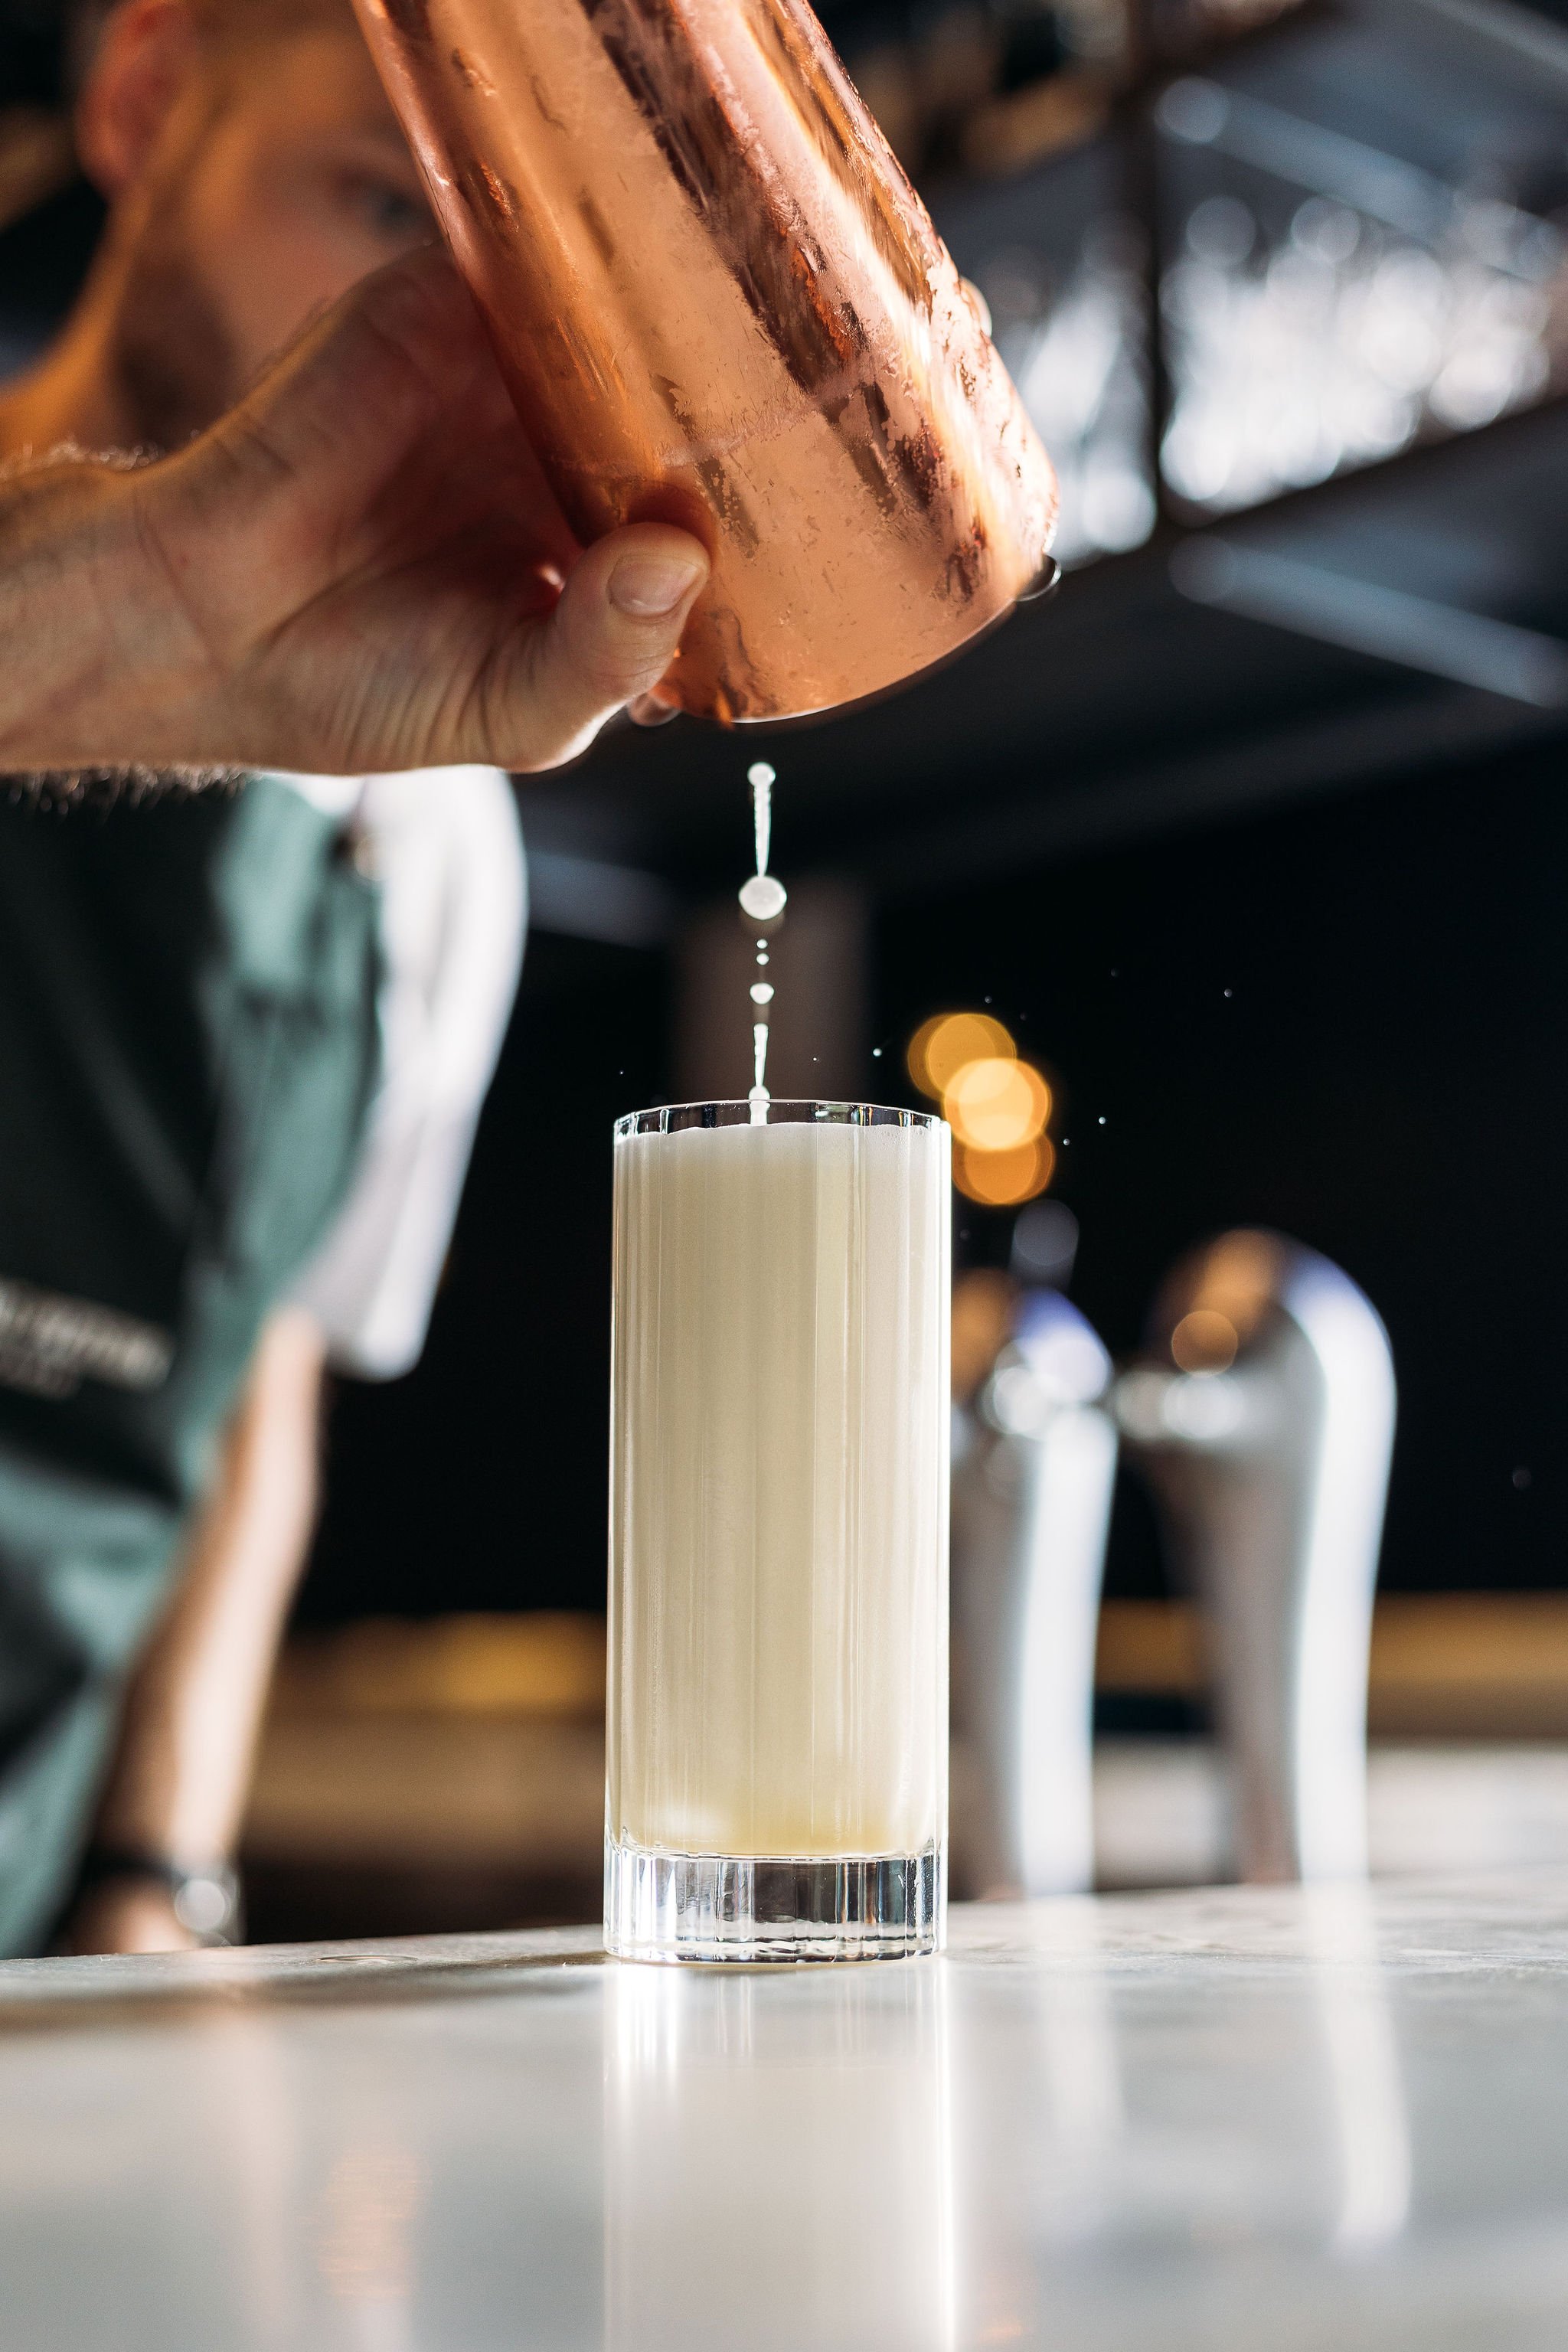 Canberra food photographer - bartender pours cocktail